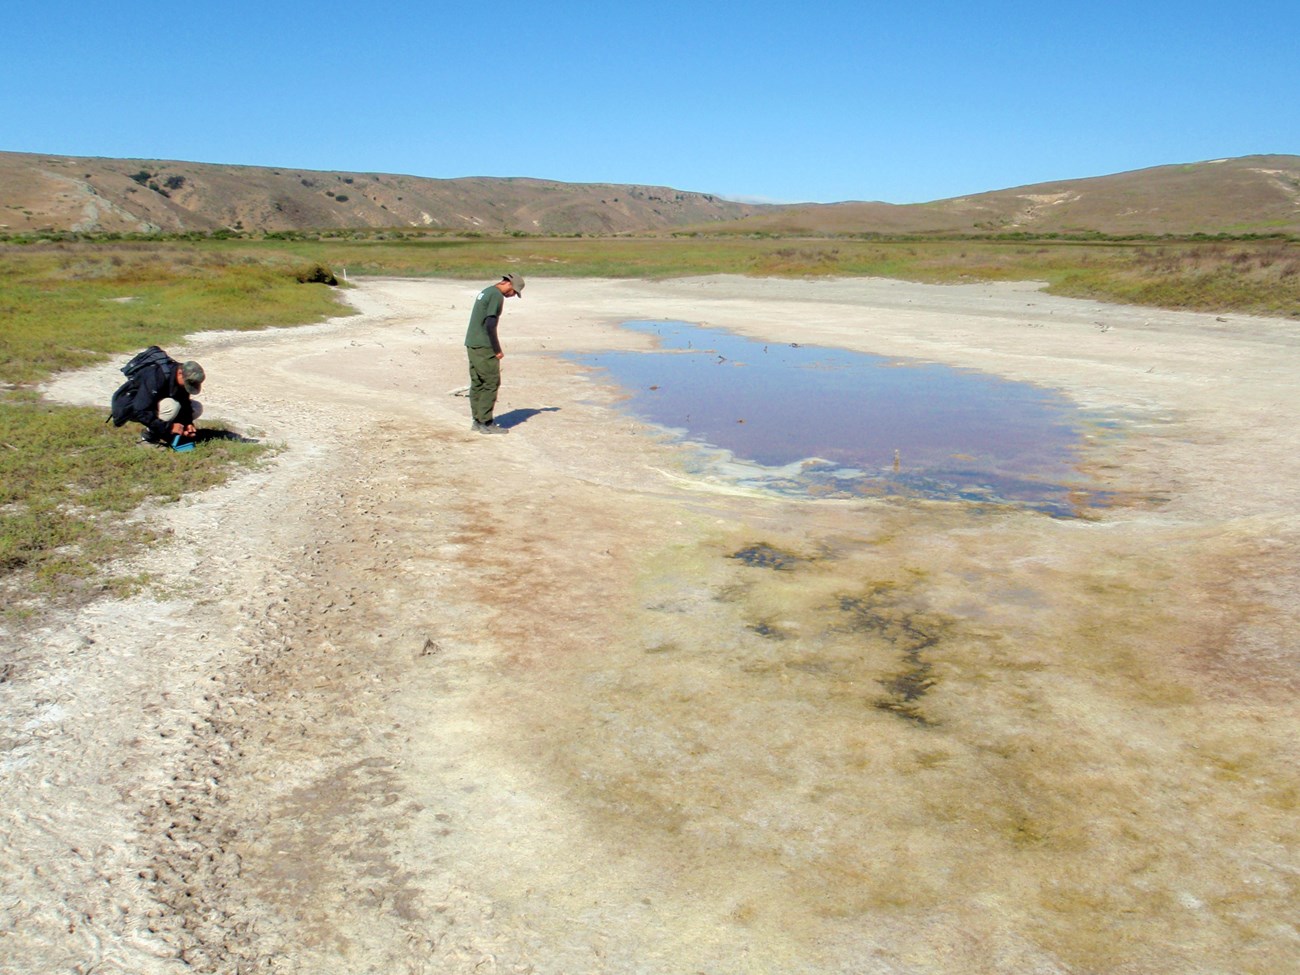 One biologist standing over a pool of water that is the remainder of Oat Point Lagoon during a dry spell, while another kneels over some equipment nearby.